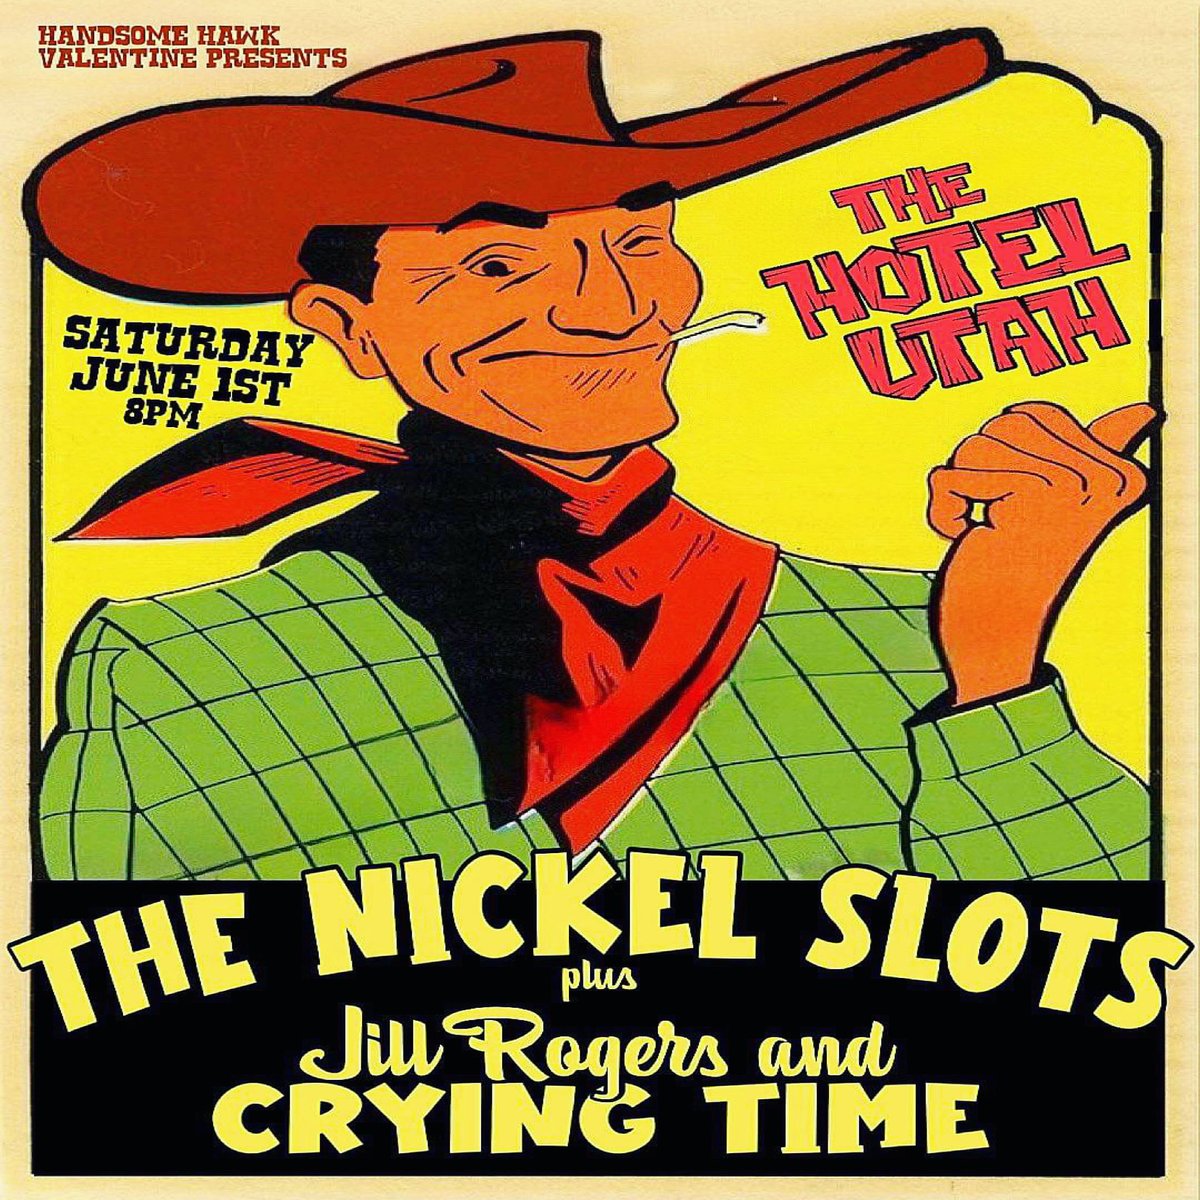 This Saturday Night June 1st HHV presents The Nickel Slots + Jill Rogers & Crying Time at The Utah! #countryrock #cowpunk #honkytonk #altcountry #supportindievenues